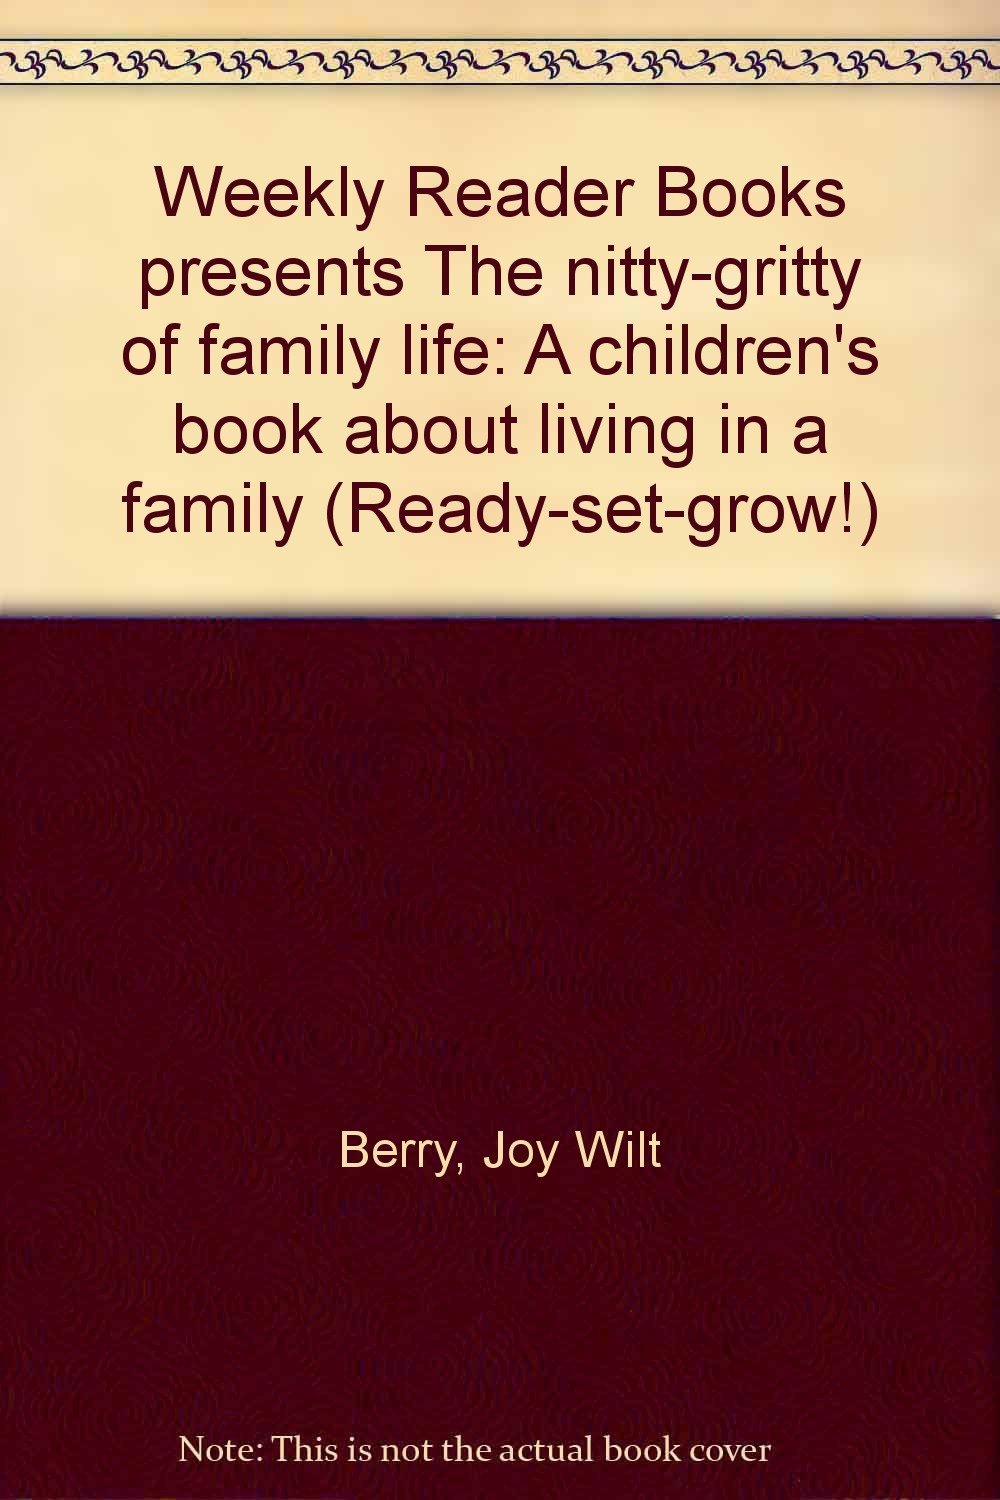 Weekly Reader Books presents The nitty-gritty of family life: A children's book  - $2.93